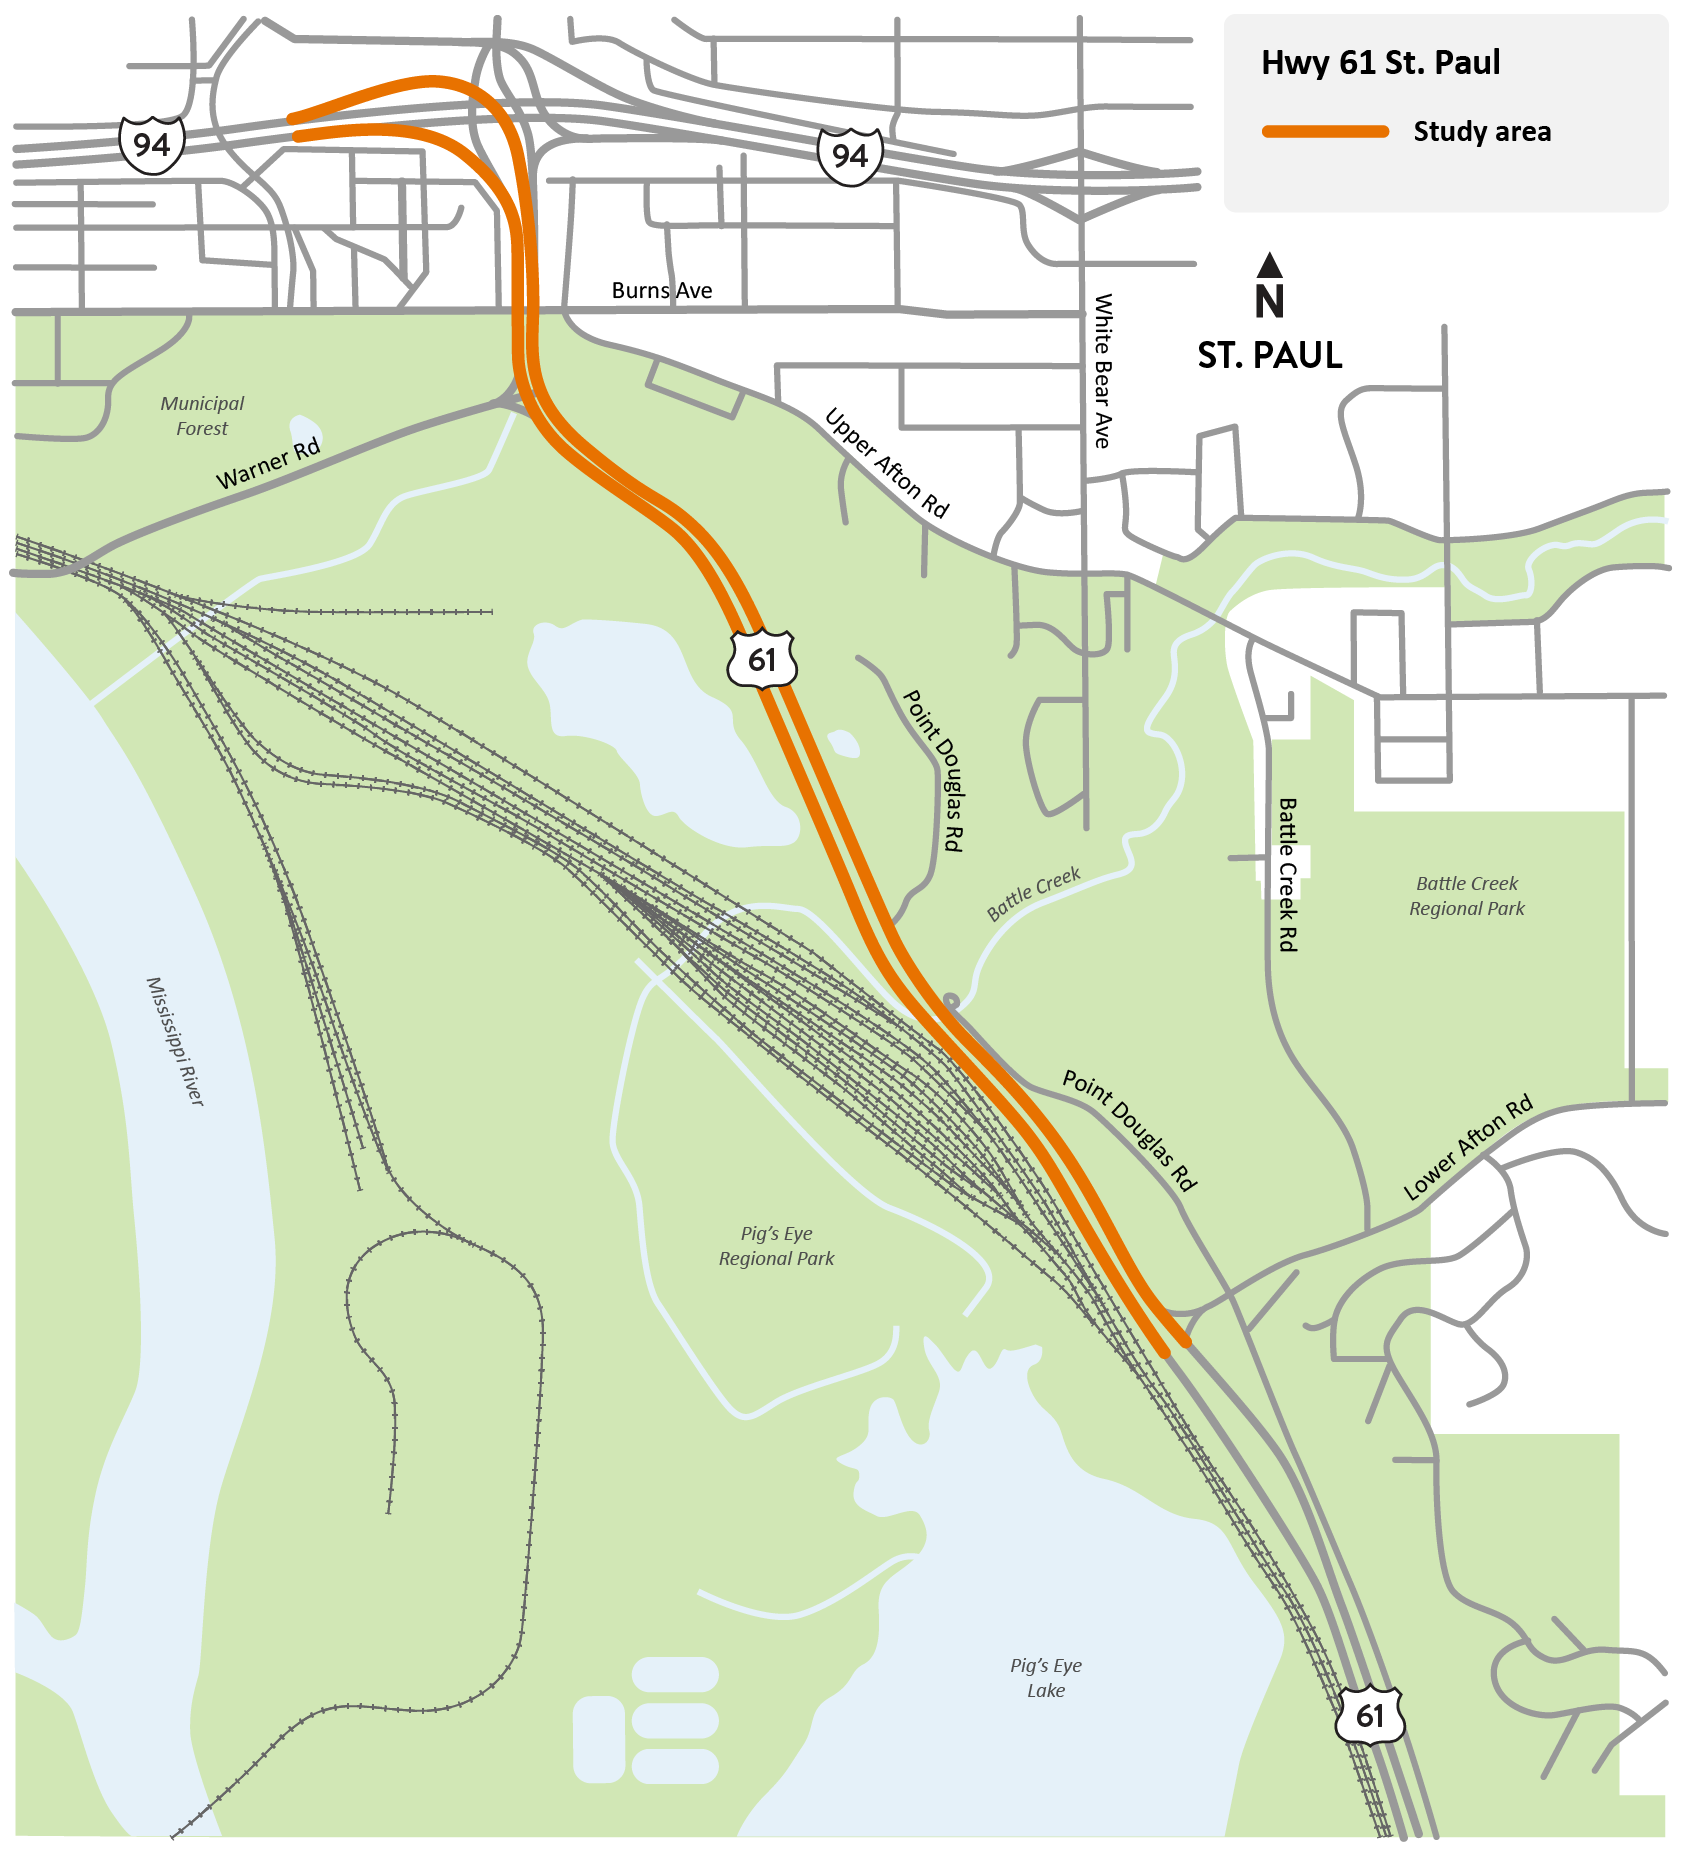 Highway 61 between I-94 and Lower Afton Road in St. Paul study location map